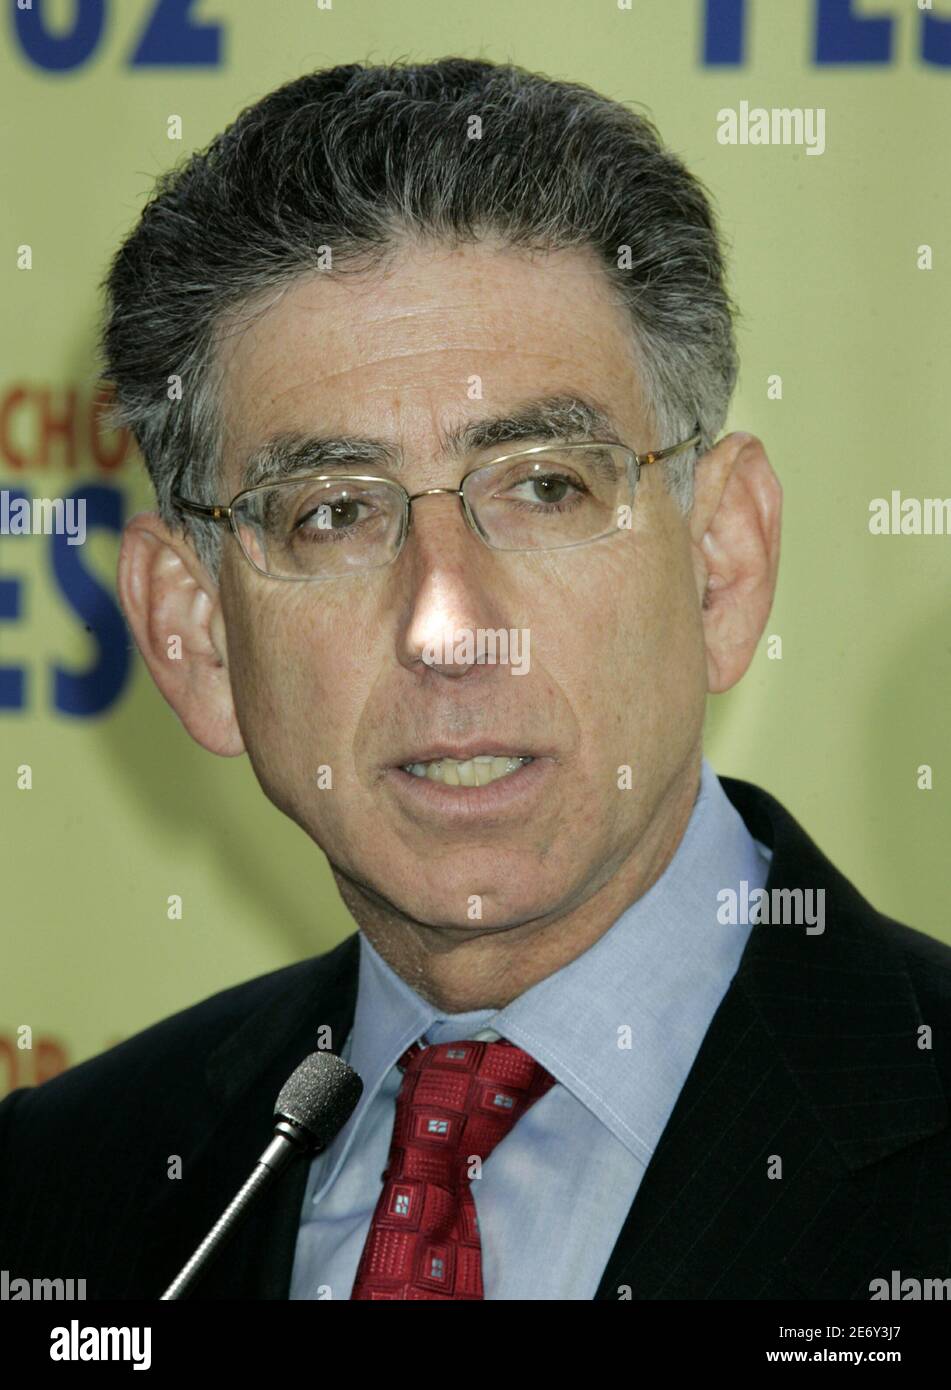 California state treasurer Phil Angelides speaks at a news conference where he endorsed California proposition 82, the preschool for all initiative, at the [Children's] Institute in Los Angeles, California, April 12, 2006. Angelides is seeking the Democratic nomination for governor of California in the June 2006 primary election. Stock Photo